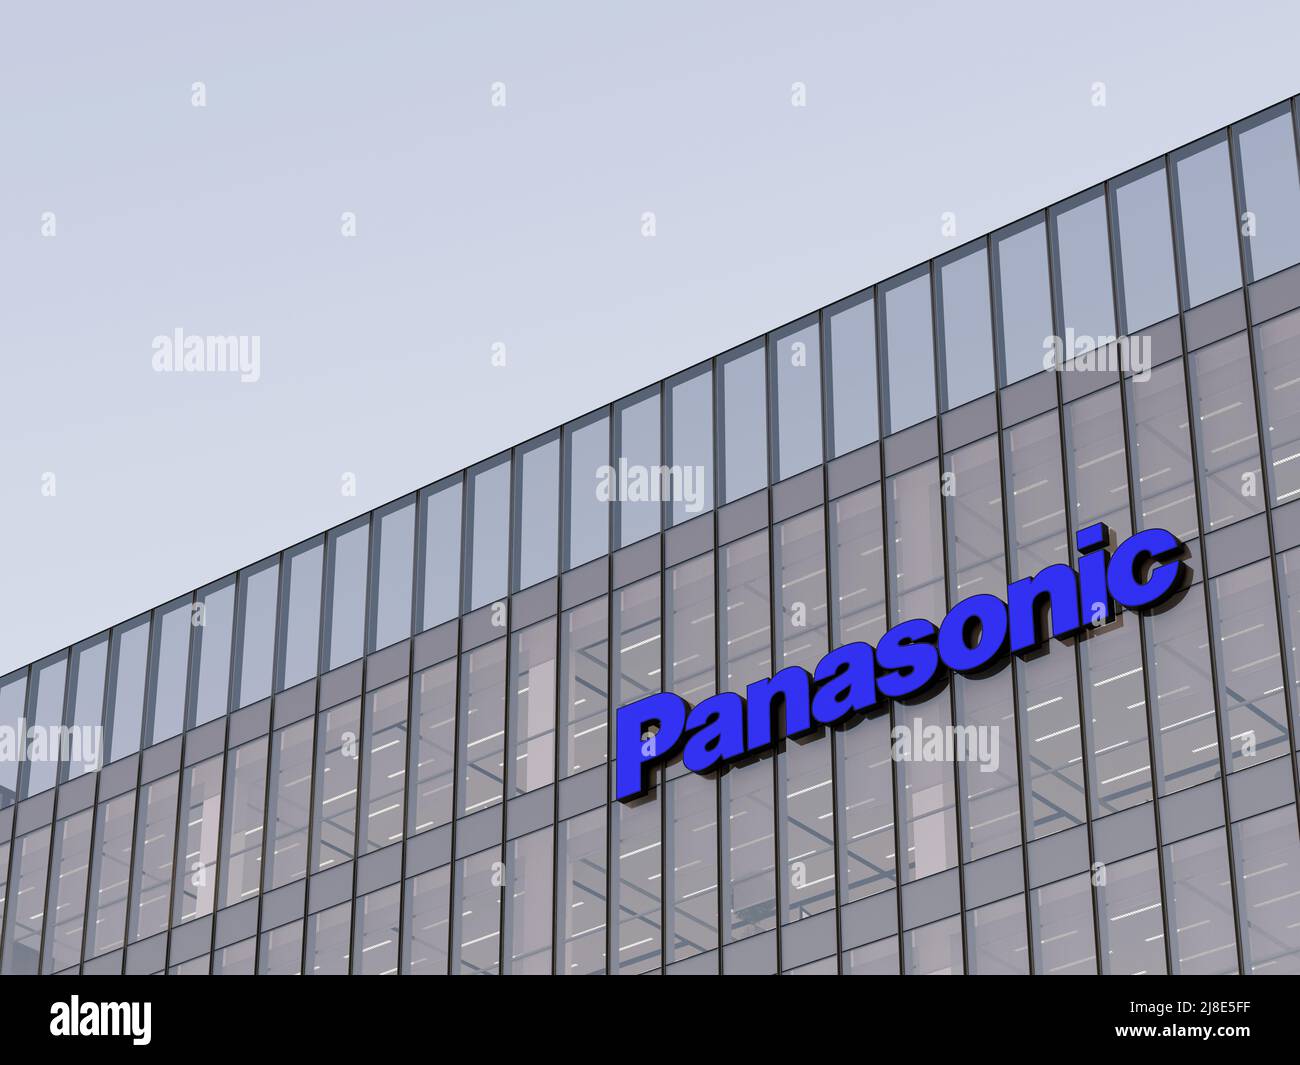 Kadoma, Osaka, Japan. May 2, 2022. Editorial Use Only, 3D CGI. Panasonic Signage Logo on Top of Glass Building. Workplace Multinational Industrial Con Stock Photo